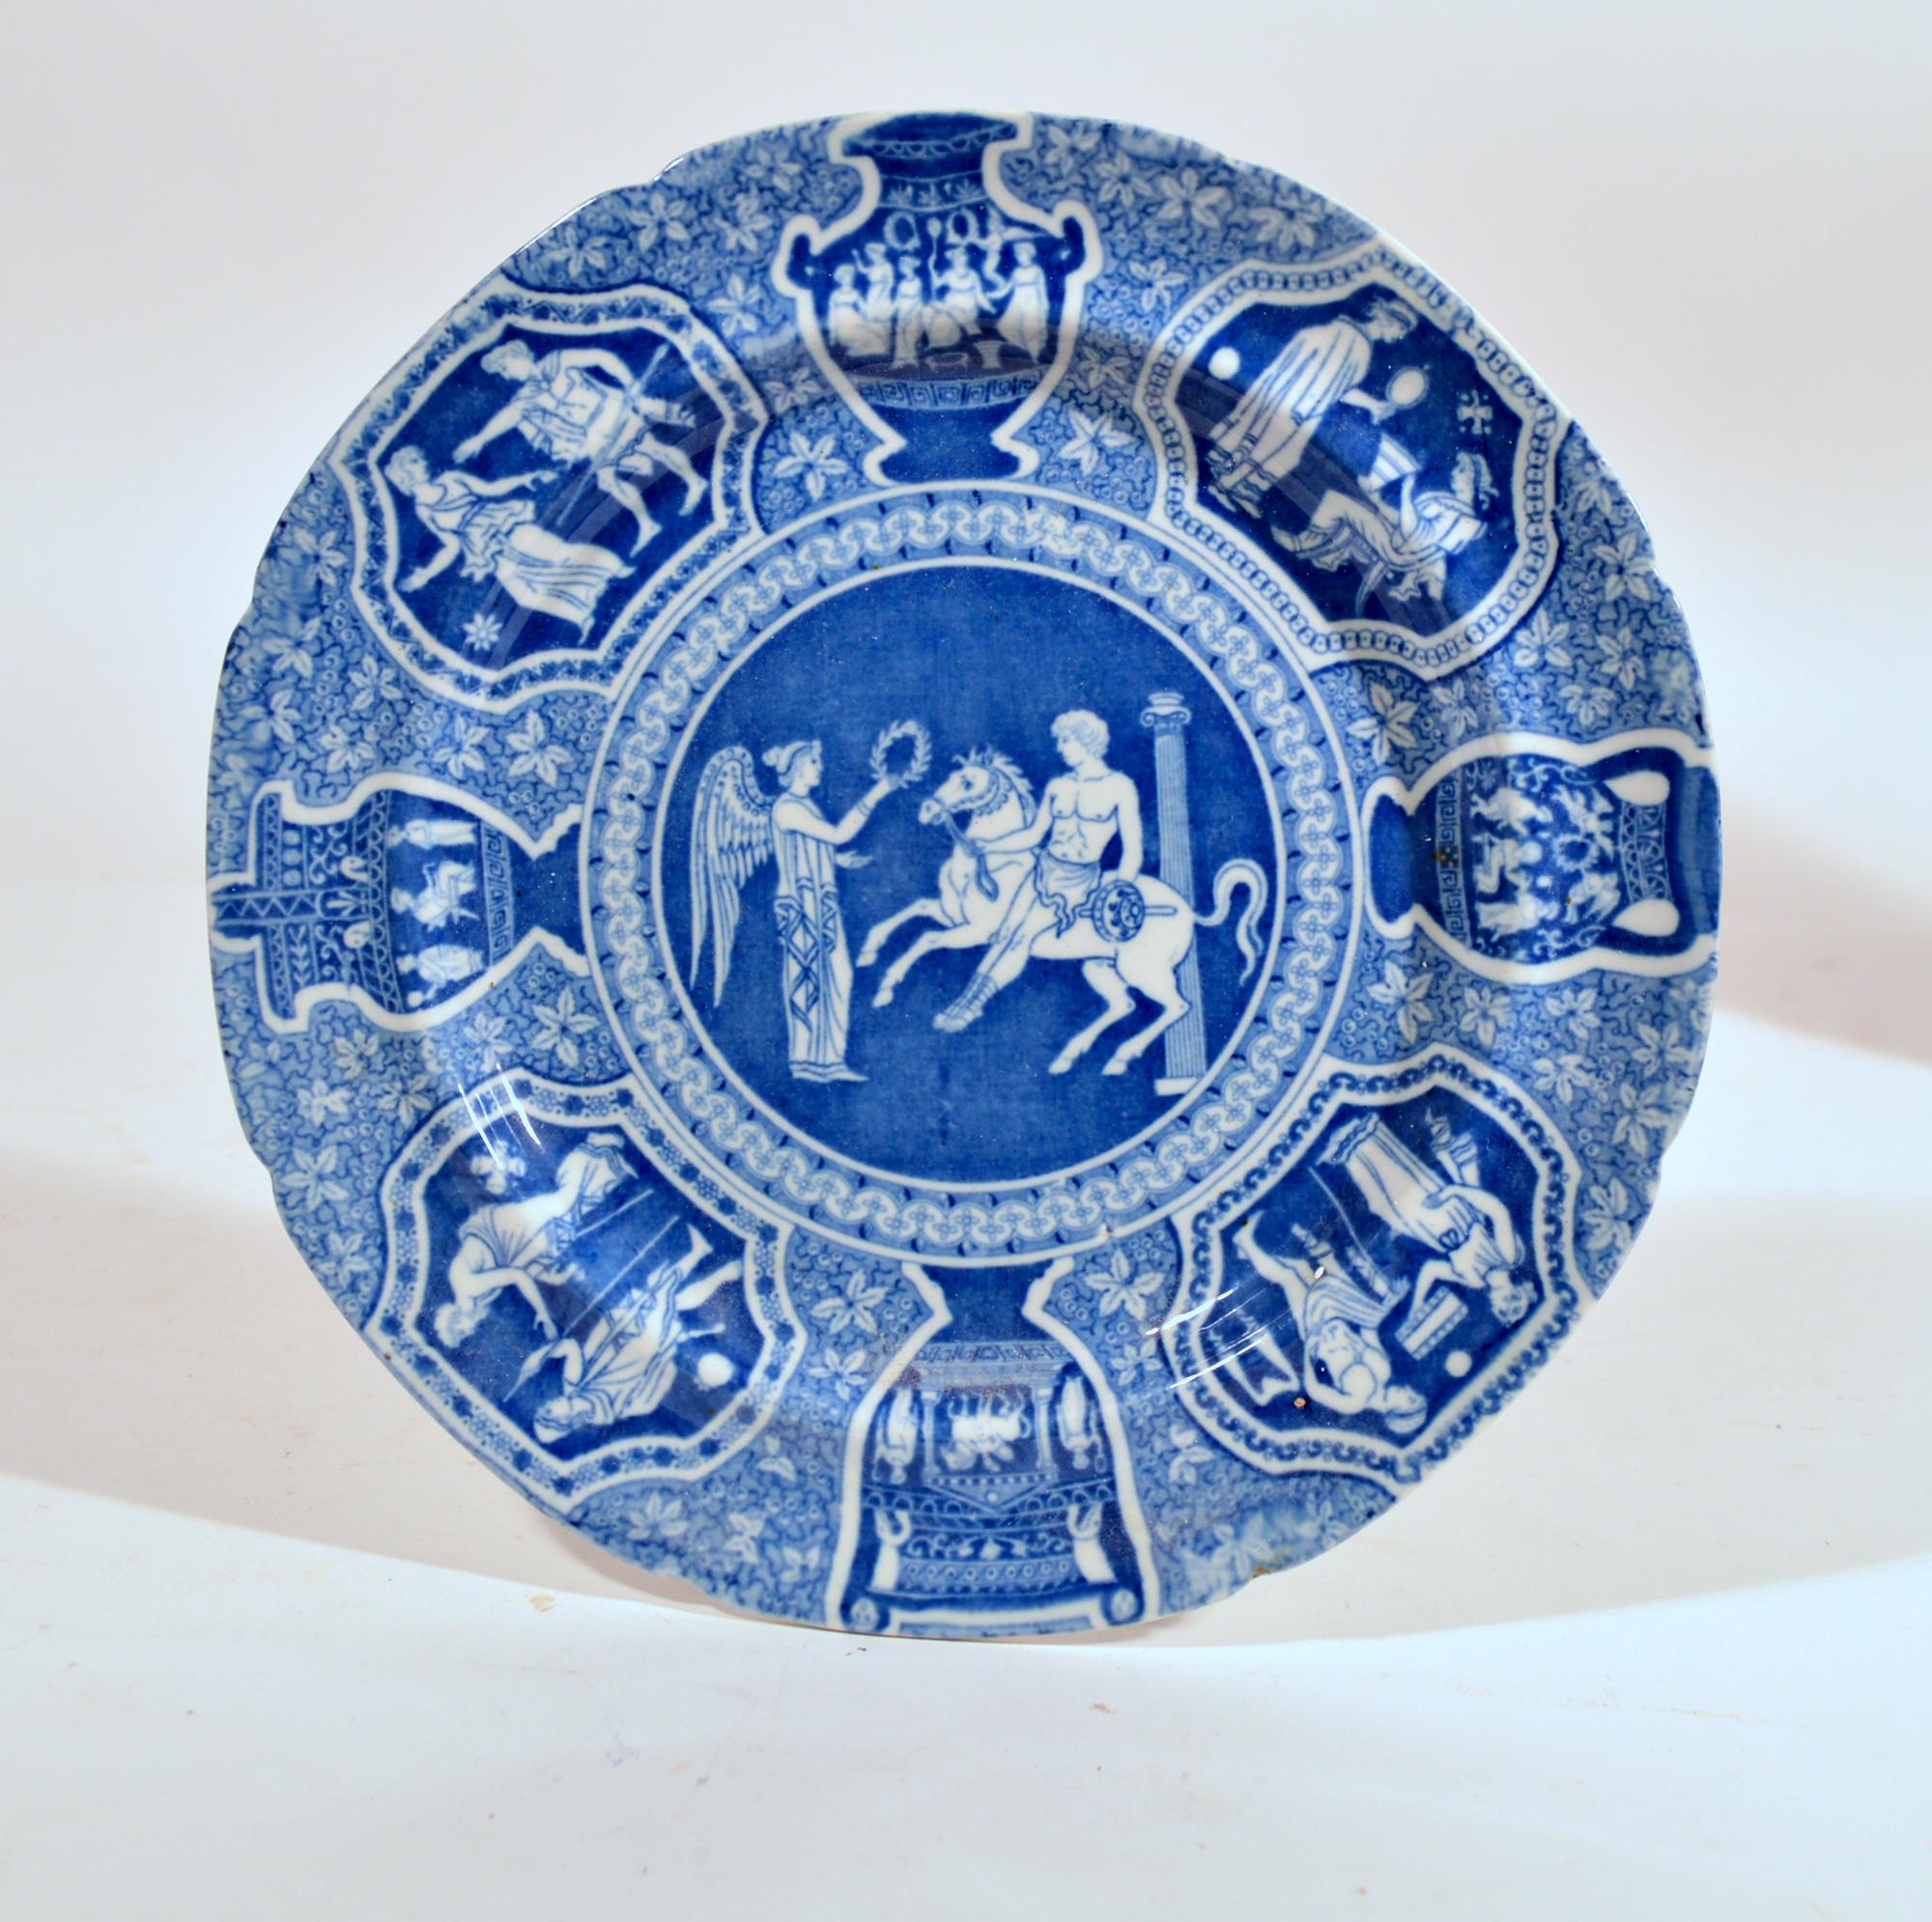 Spode Pottery neoclassical Greek pattern blue salad plates,
 Refreshment for Phliasian Horseman (Set of Fifteen)
Early 19th century

From a large collection of Spode Greek Pattern objects.
The Spode Greek pattern pottery plate is printed in